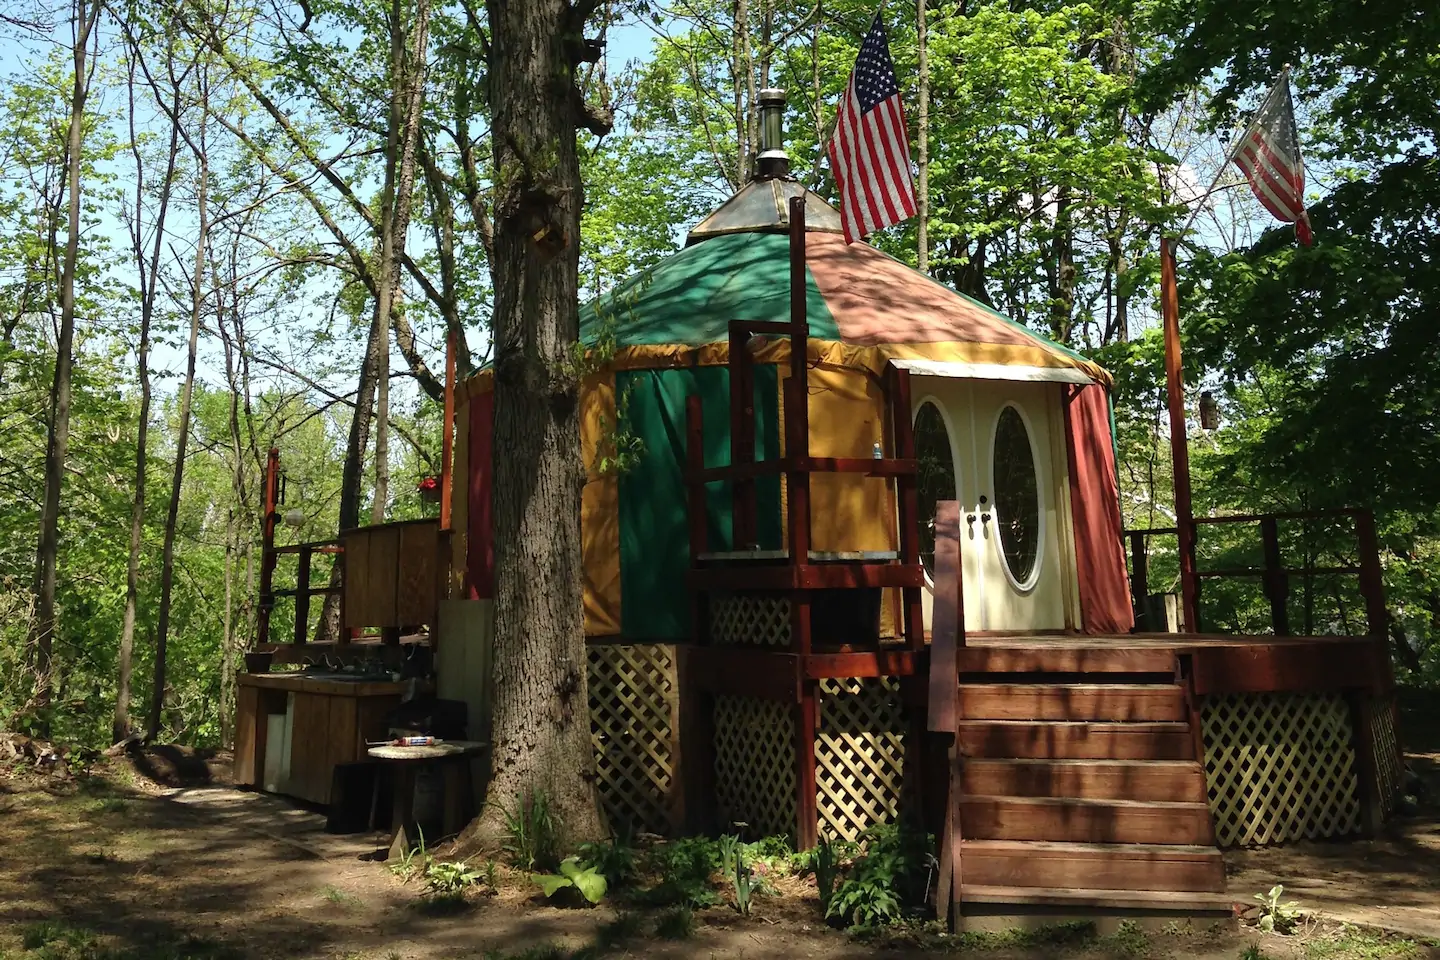 Yurt in Indiana in the woods with American flags